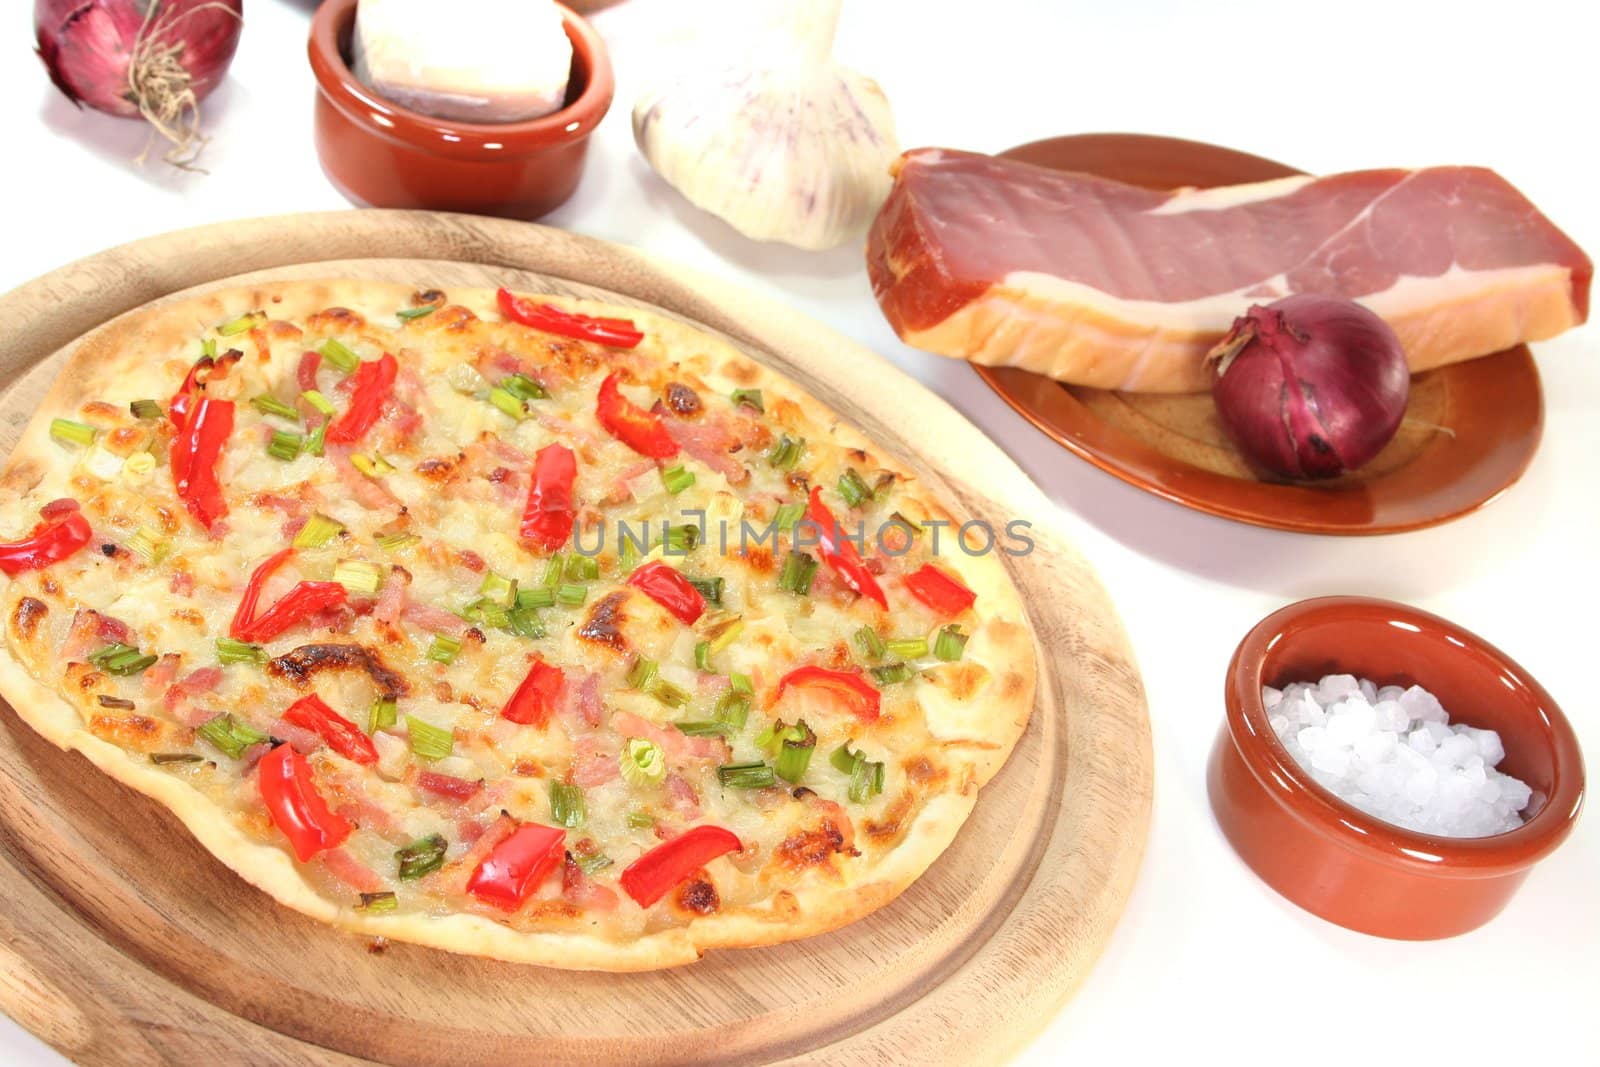 tarte flambee with bacon, green onions and red pepper